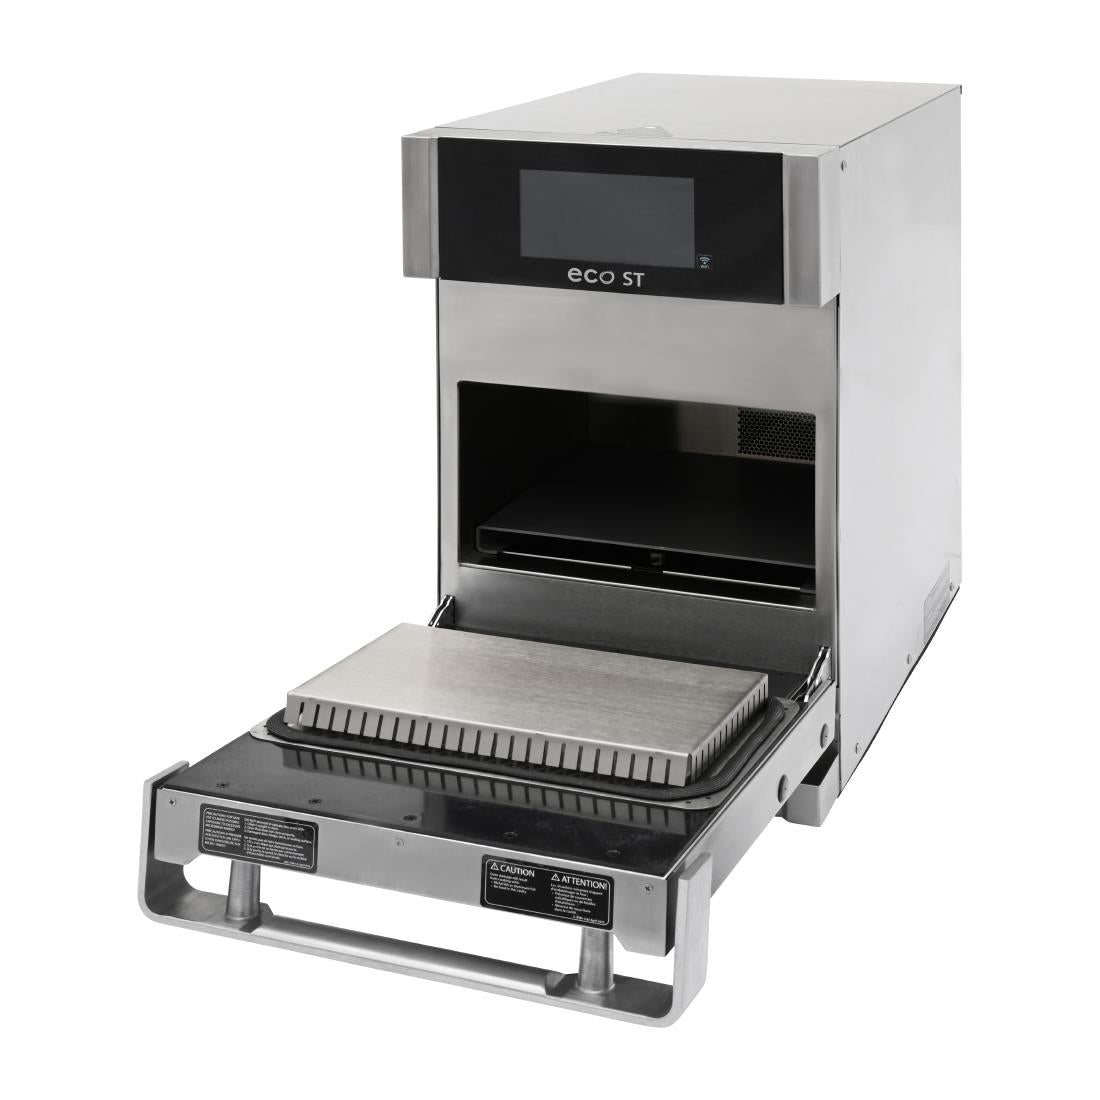 CH232 Turbochef Eco ST Ventless Rapid Cook Oven JD Catering Equipment Solutions Ltd